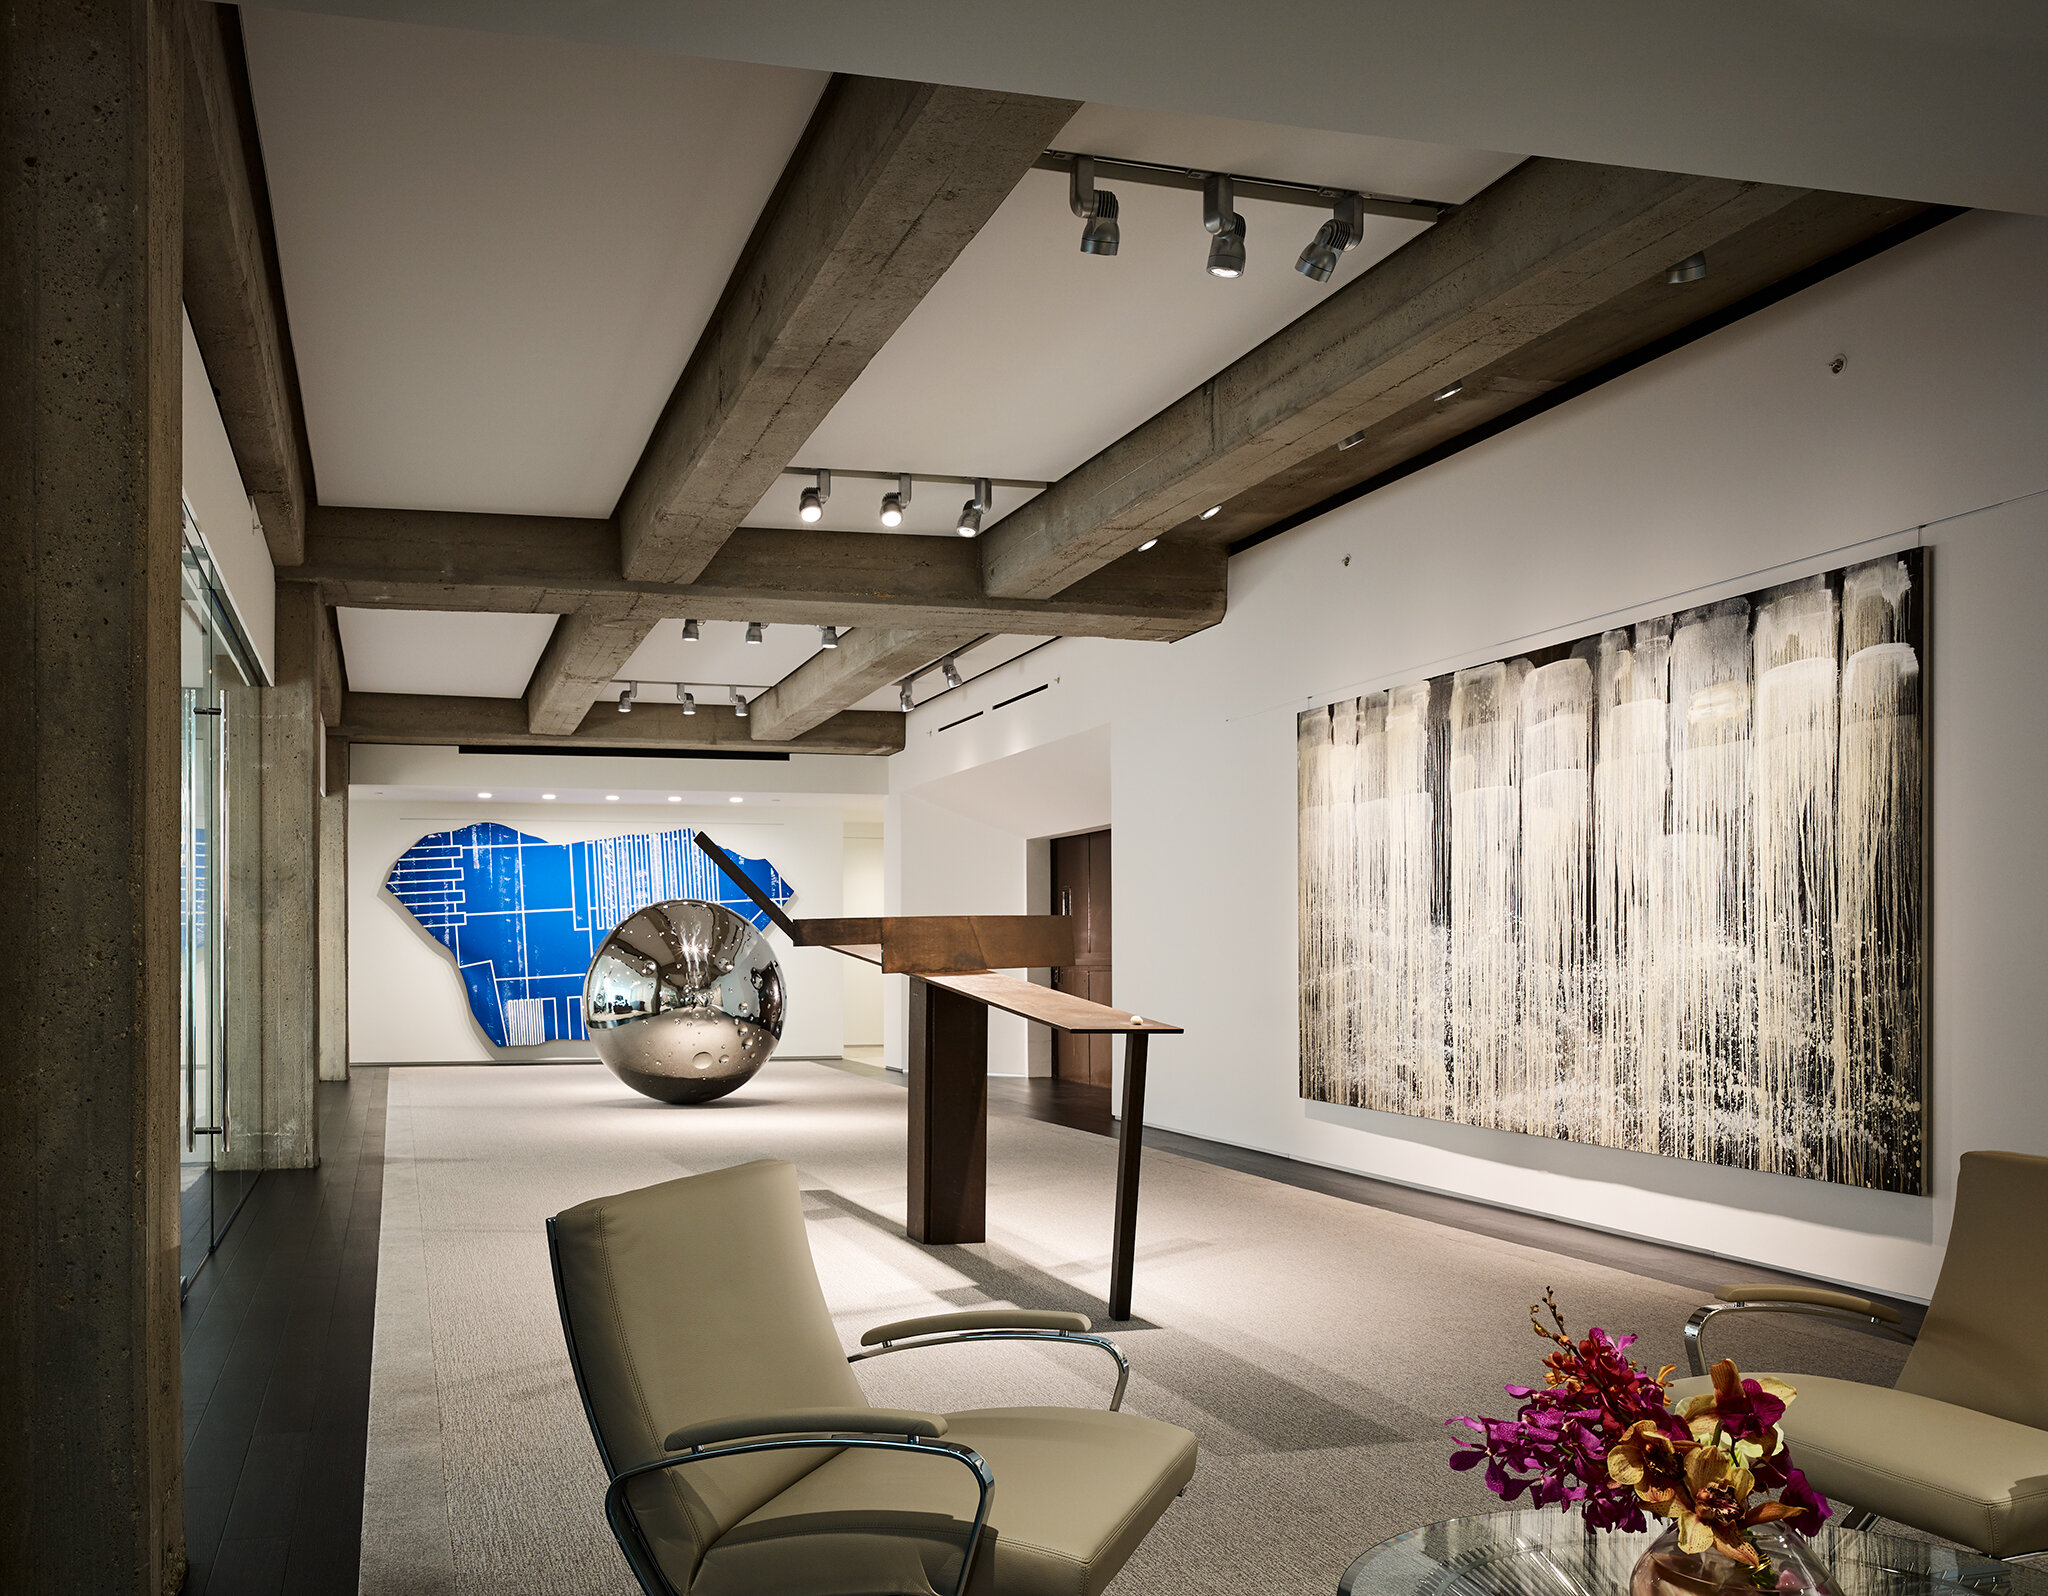  AWARDS  Office Transformation Honoree, Interior Design’s Best of Design, 2020    Eagle Family Executive Offices  DLR Group |  Staffelbach   Dallas, Texas     Return to projects  